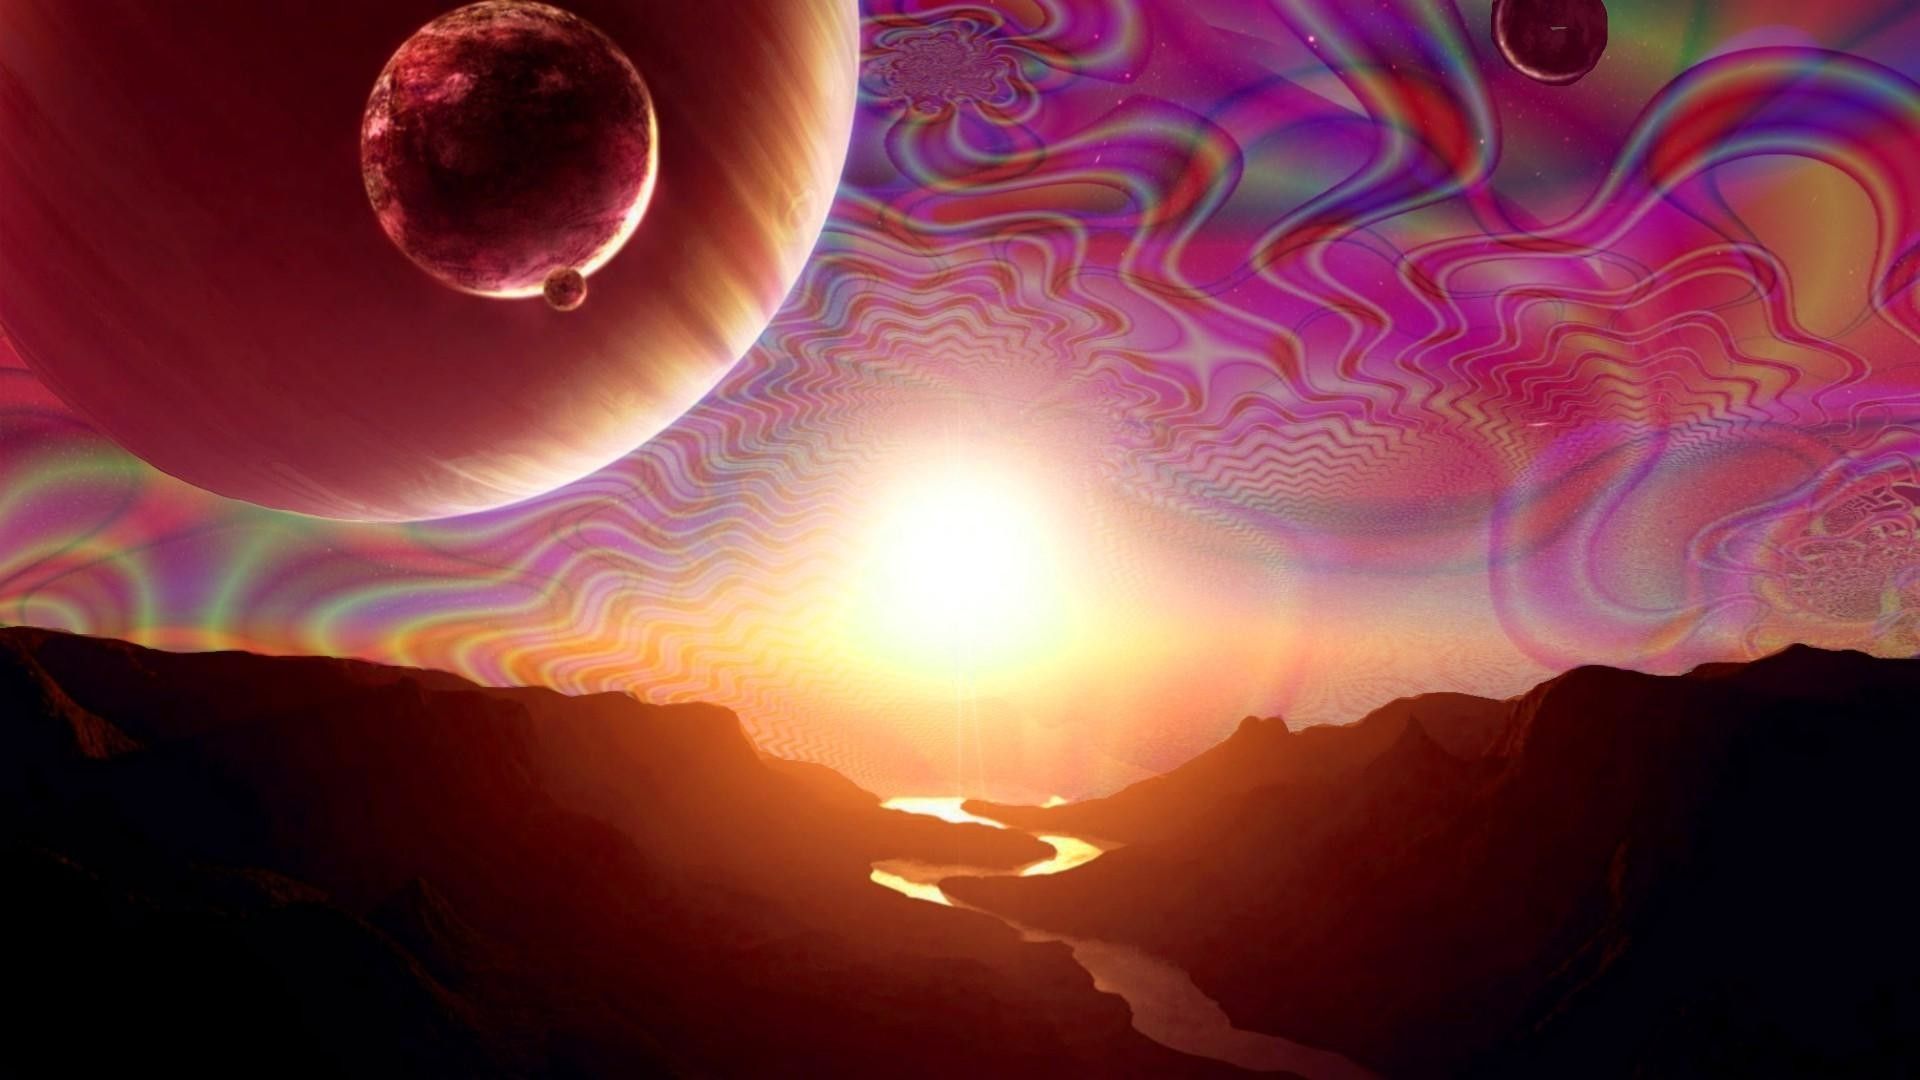 psychedelic space wallpaper hd